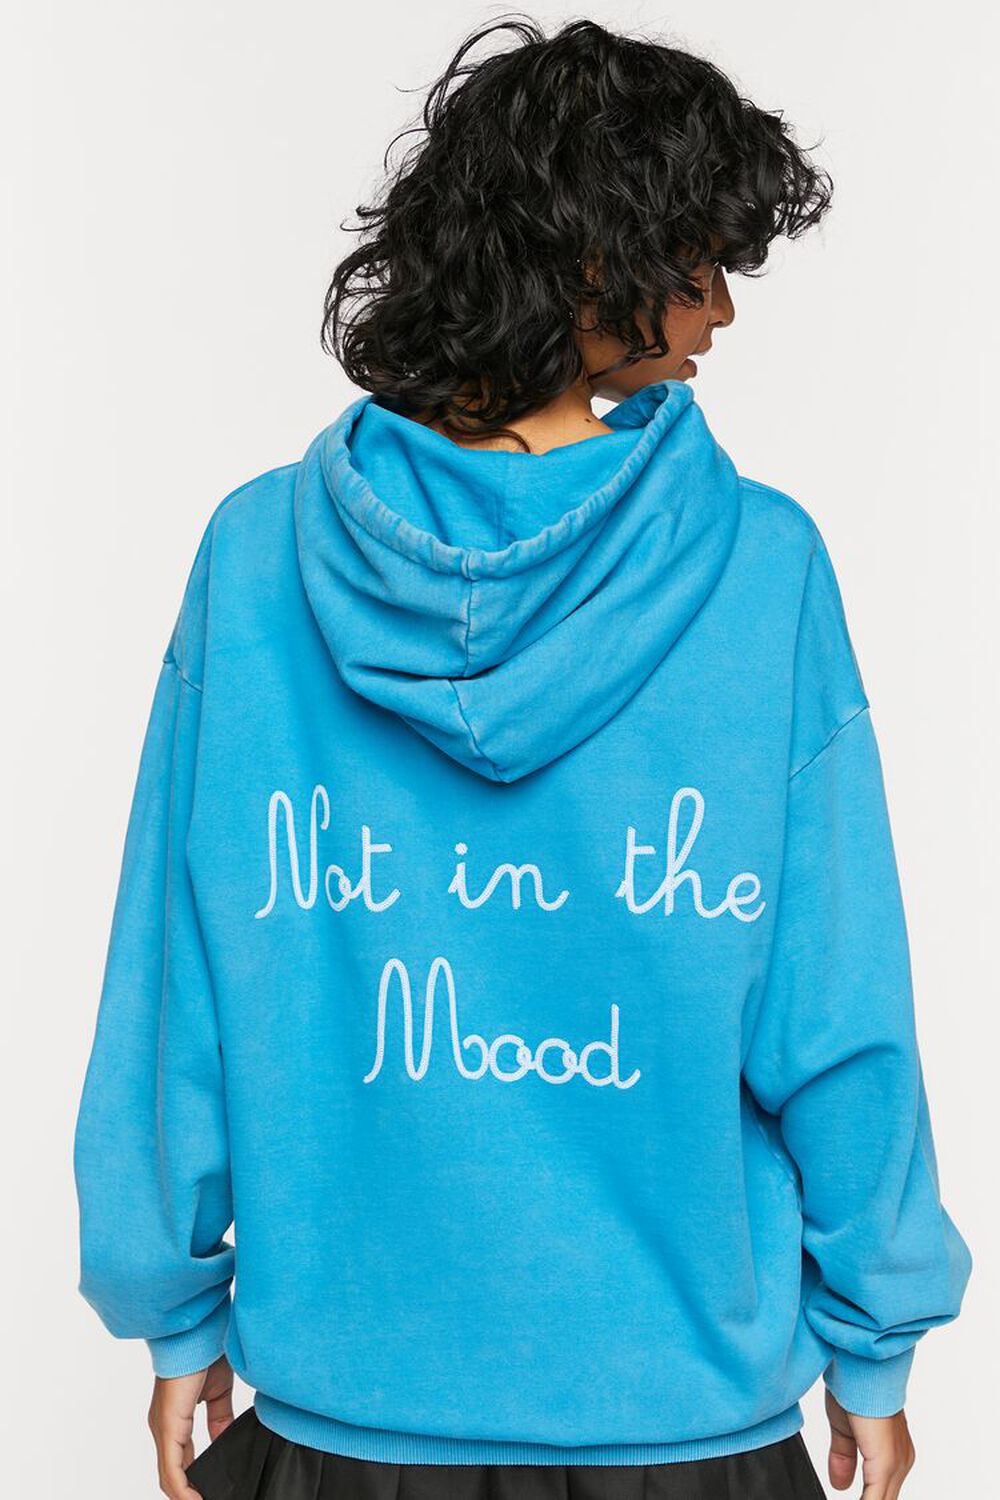 TEAL/MULTI Not In The Mood Graphic Hoodie, image 3